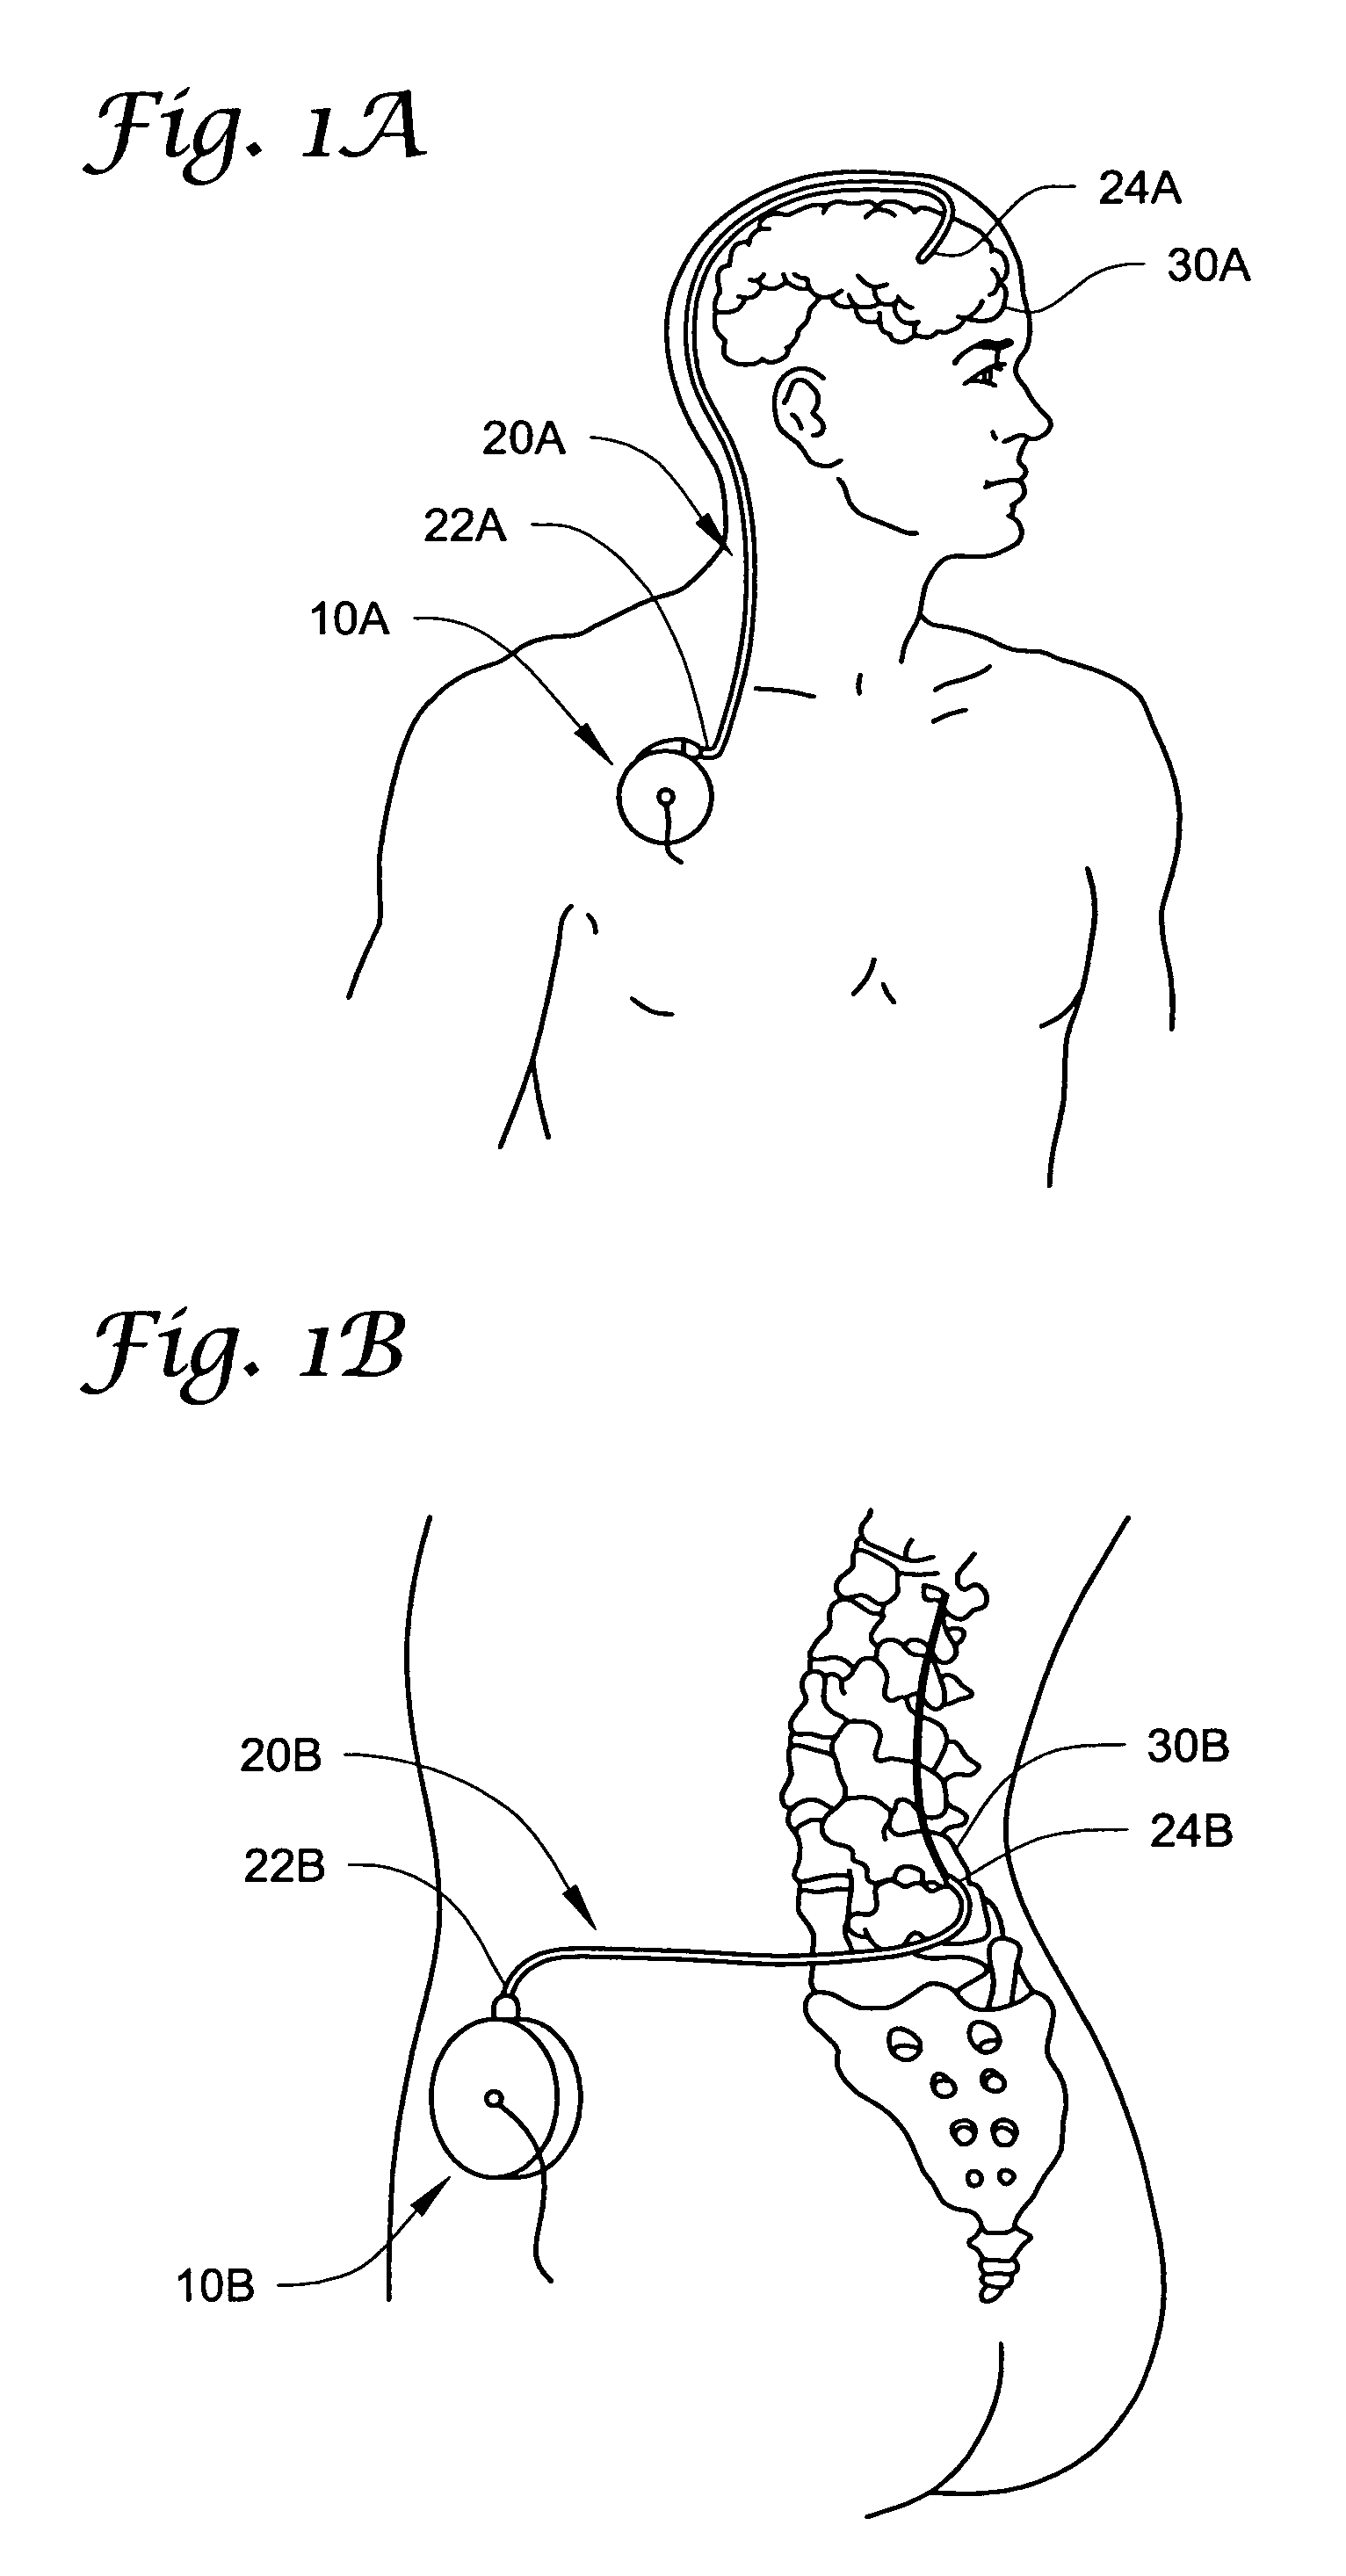 Reduction of inflammatory mass with spinal catheters